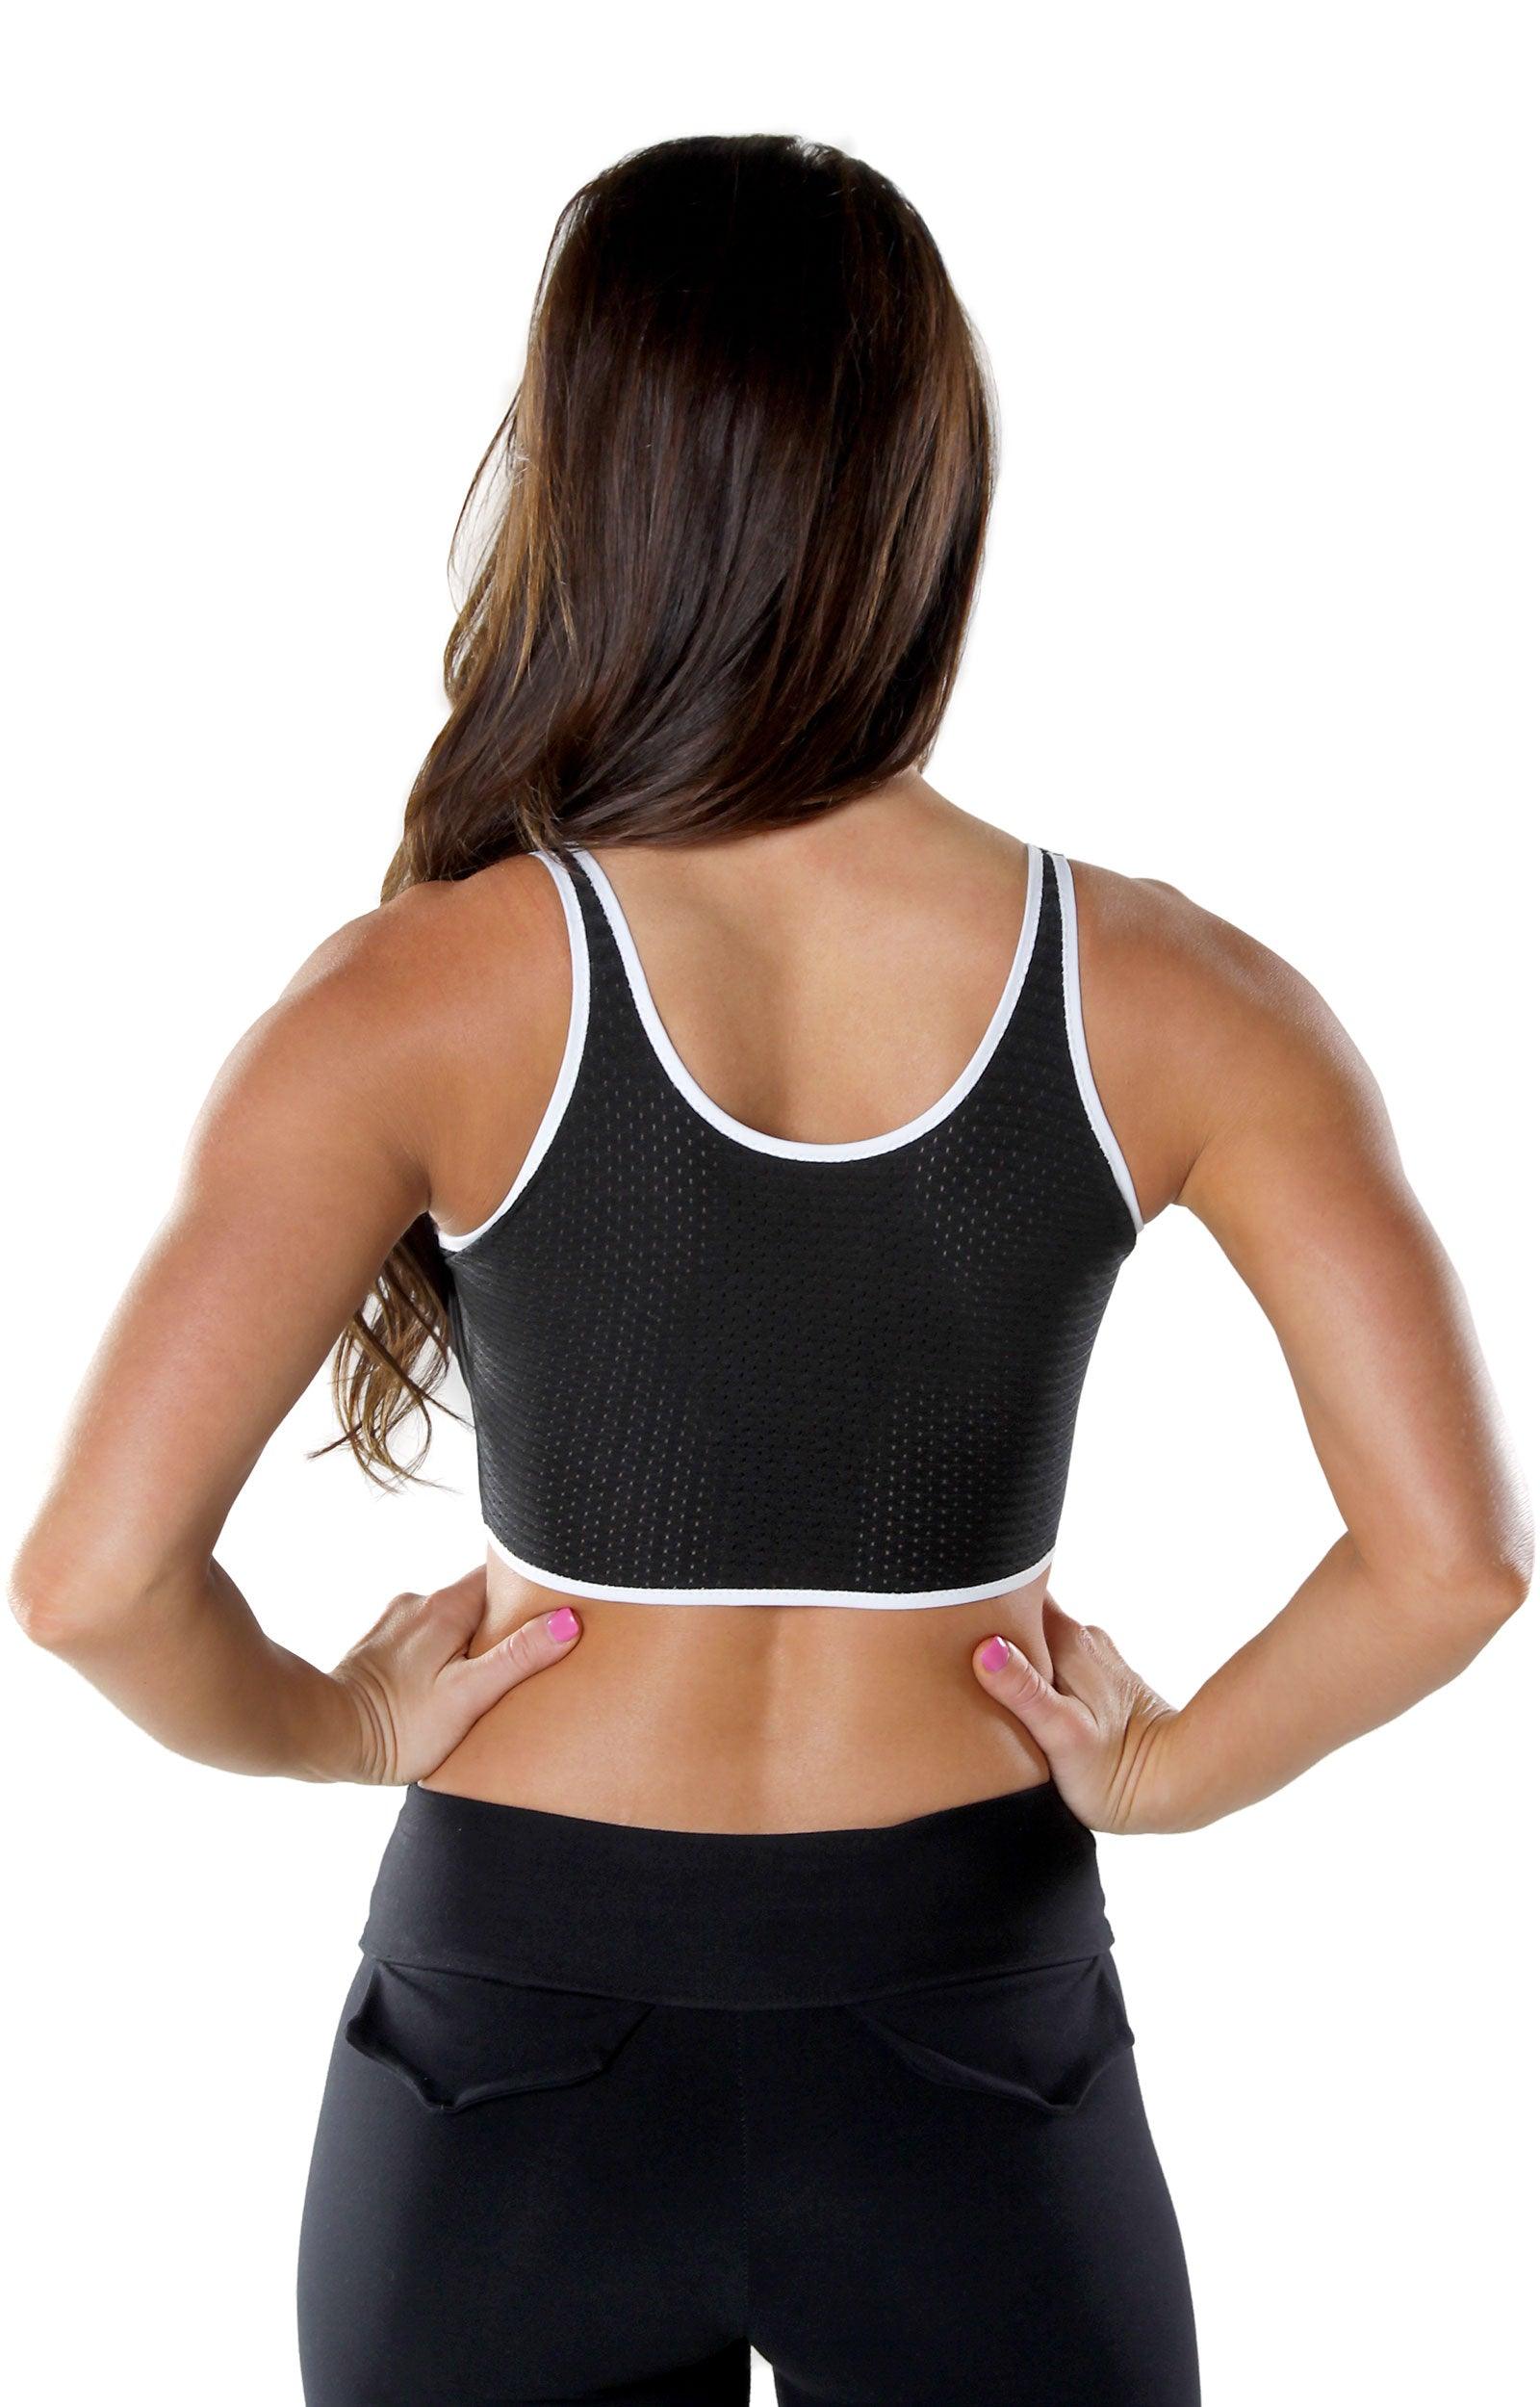 Your New Favourite Sports Bra Our moulded sports bra is made from